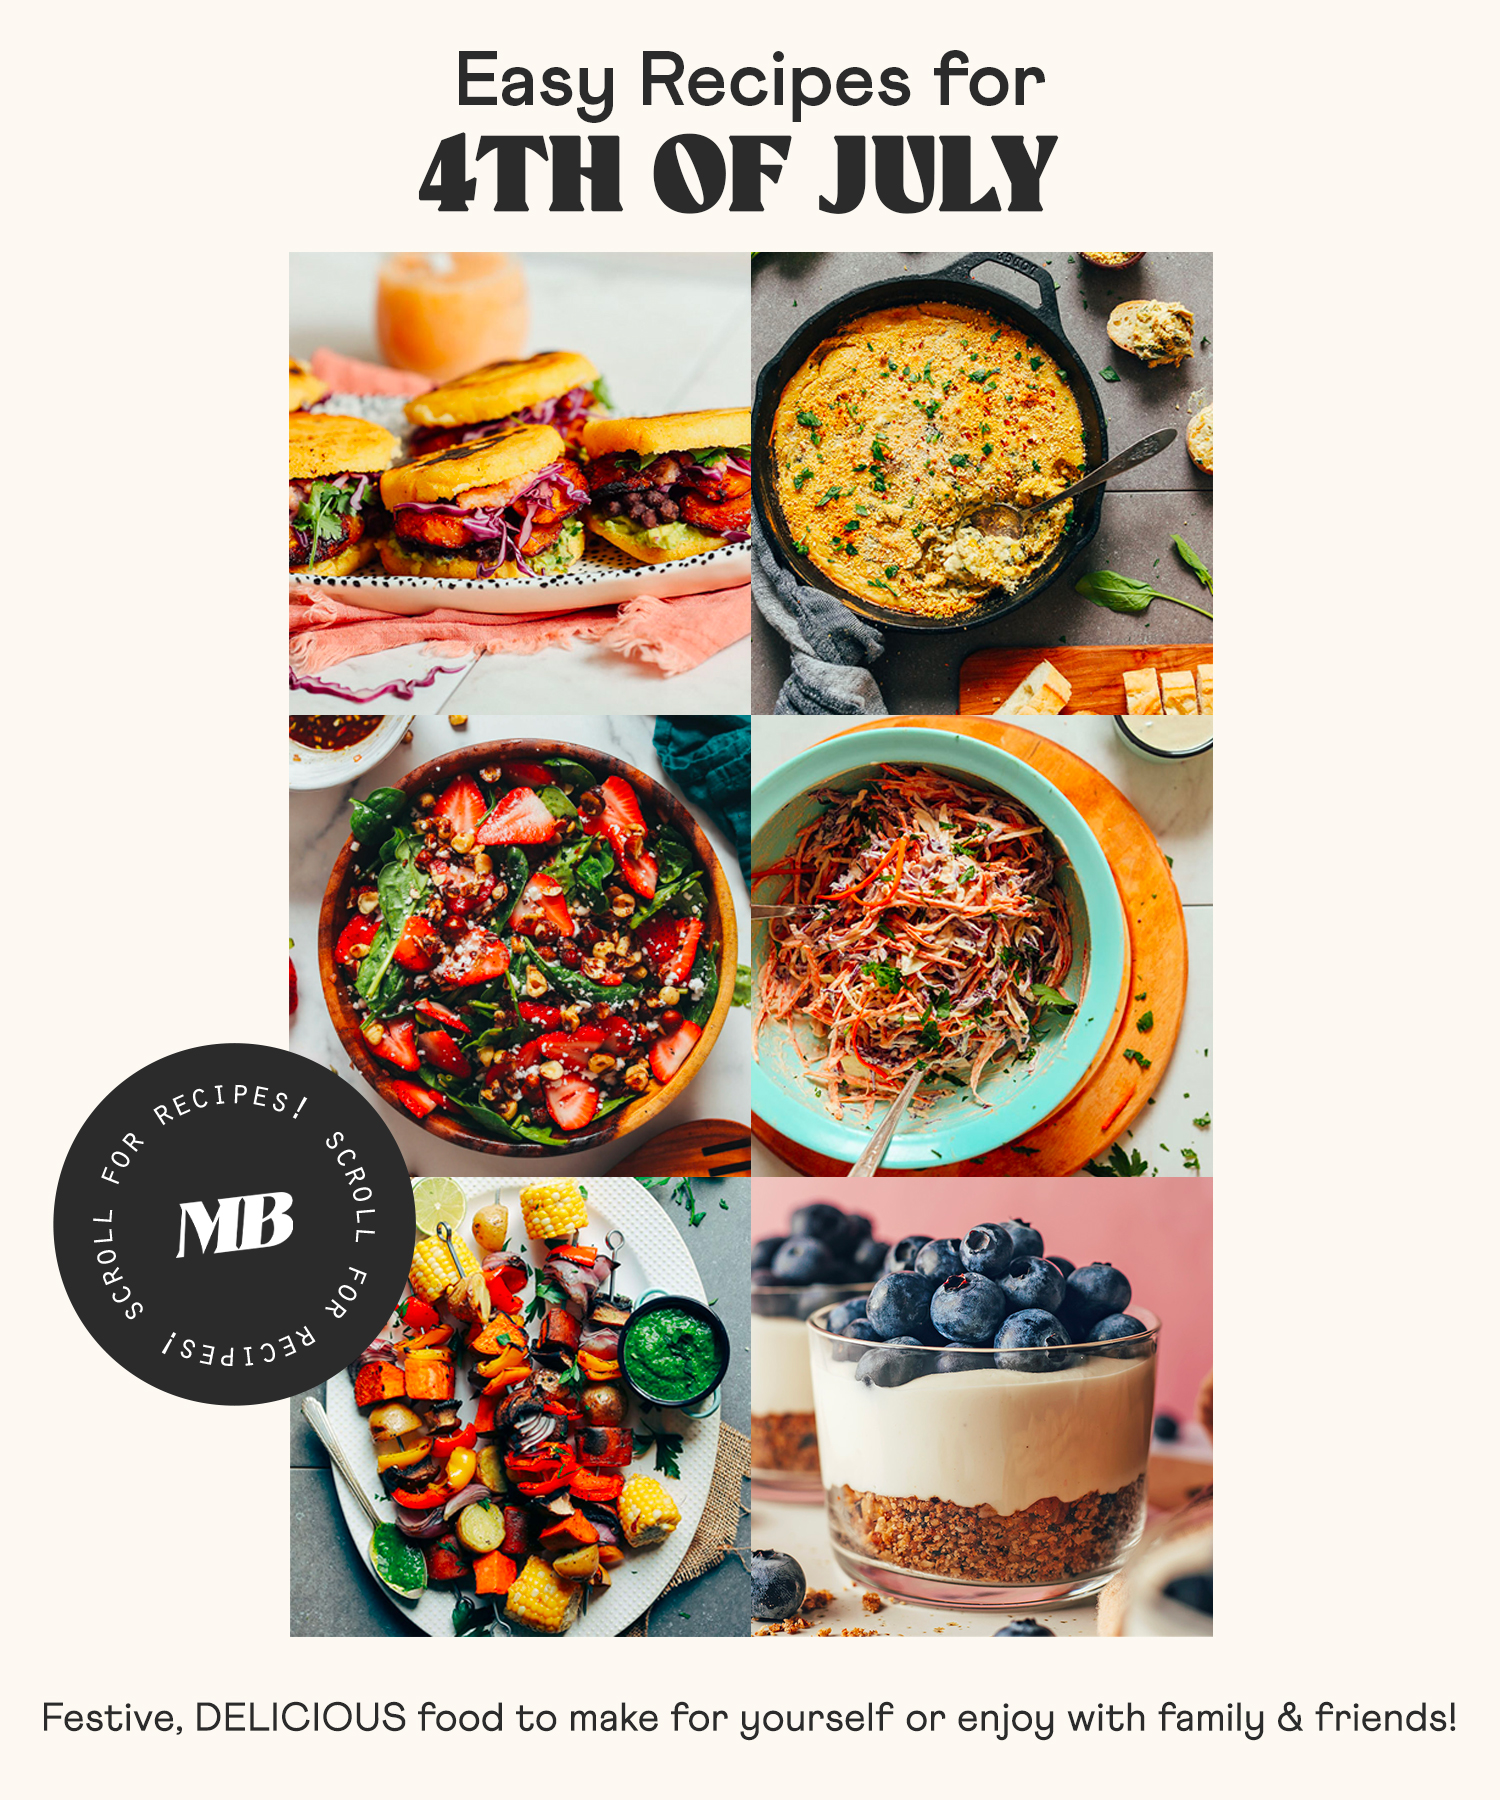 Recipe photos of easy, delicious recipes for 4th of July